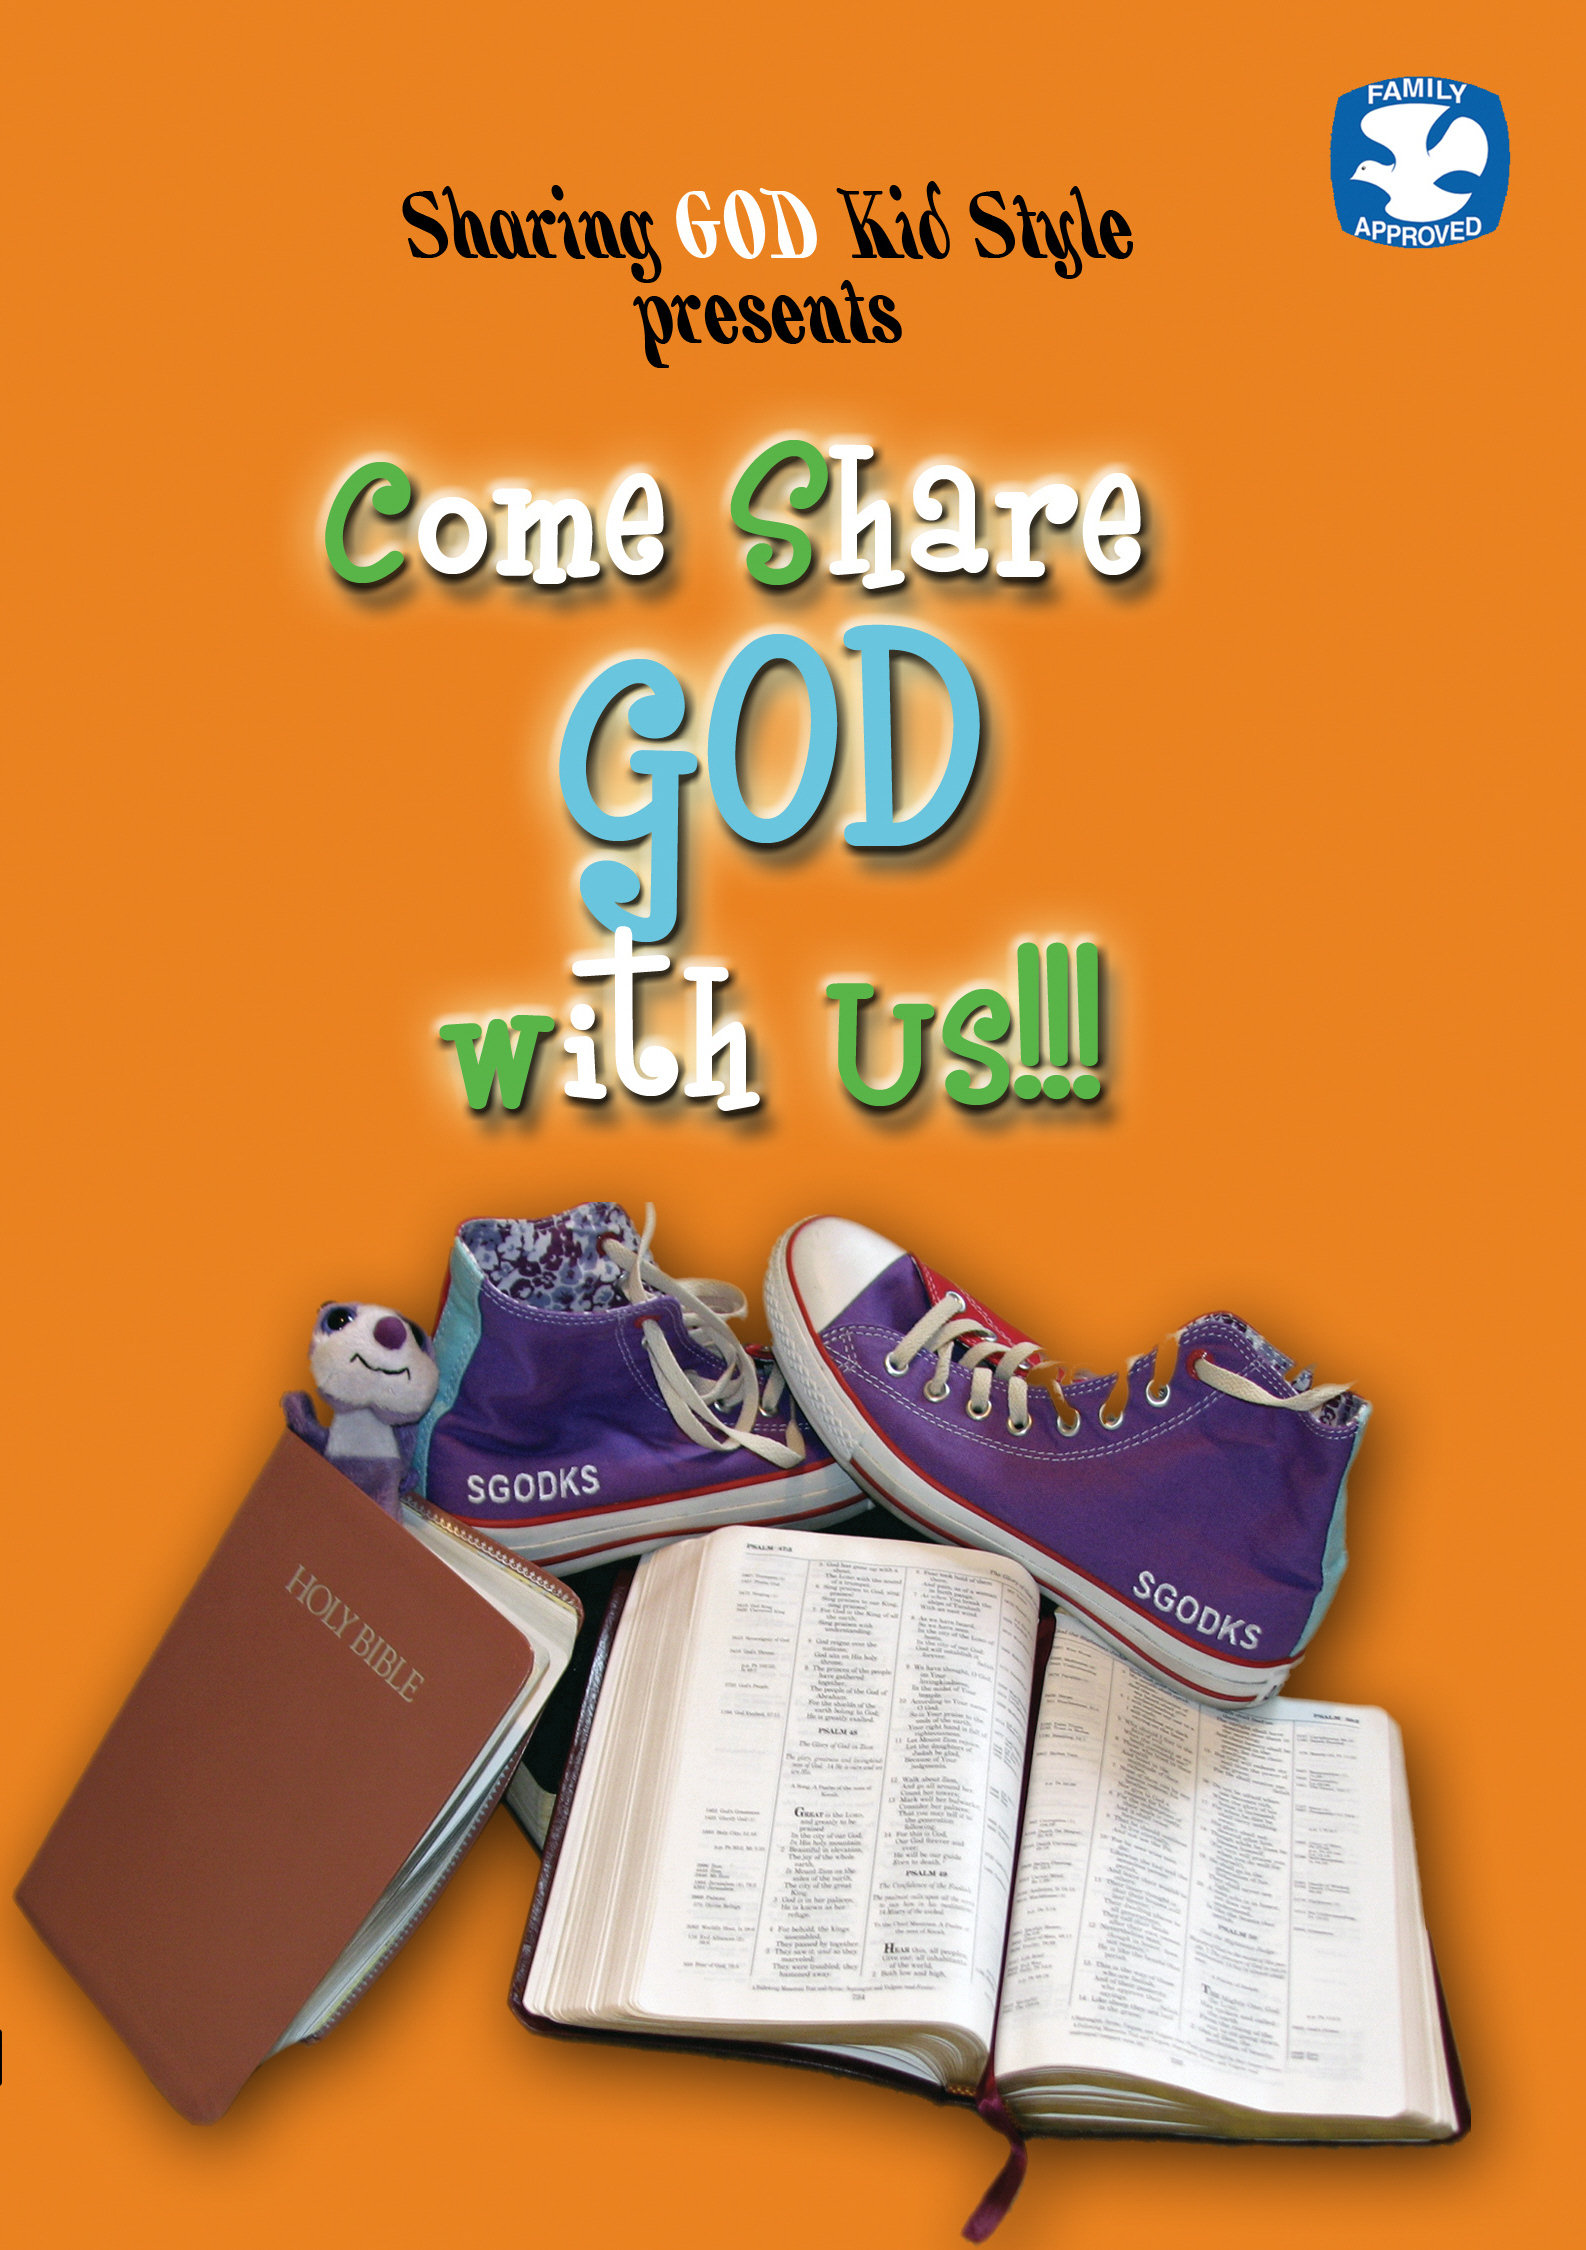 Designed by Michele Gottlieb. ~ Come Share GOD with Us!!! and join the movement for the LORD ~